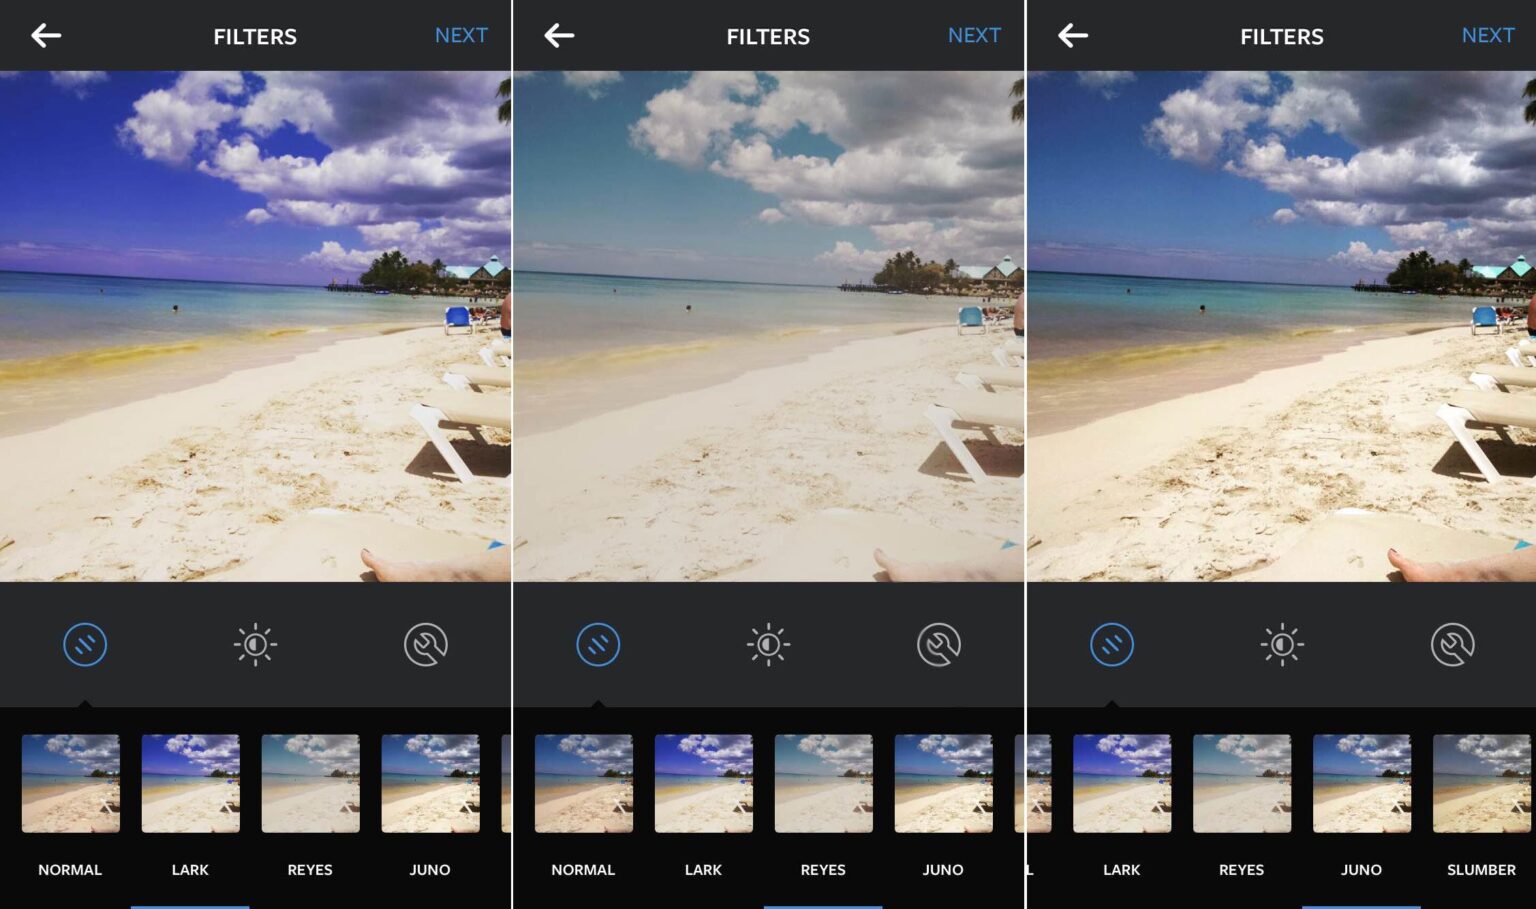 If you're trying to boost your activity on Instagram, filters will save you. Use our guide to help get you more likes on Instagram through filters.